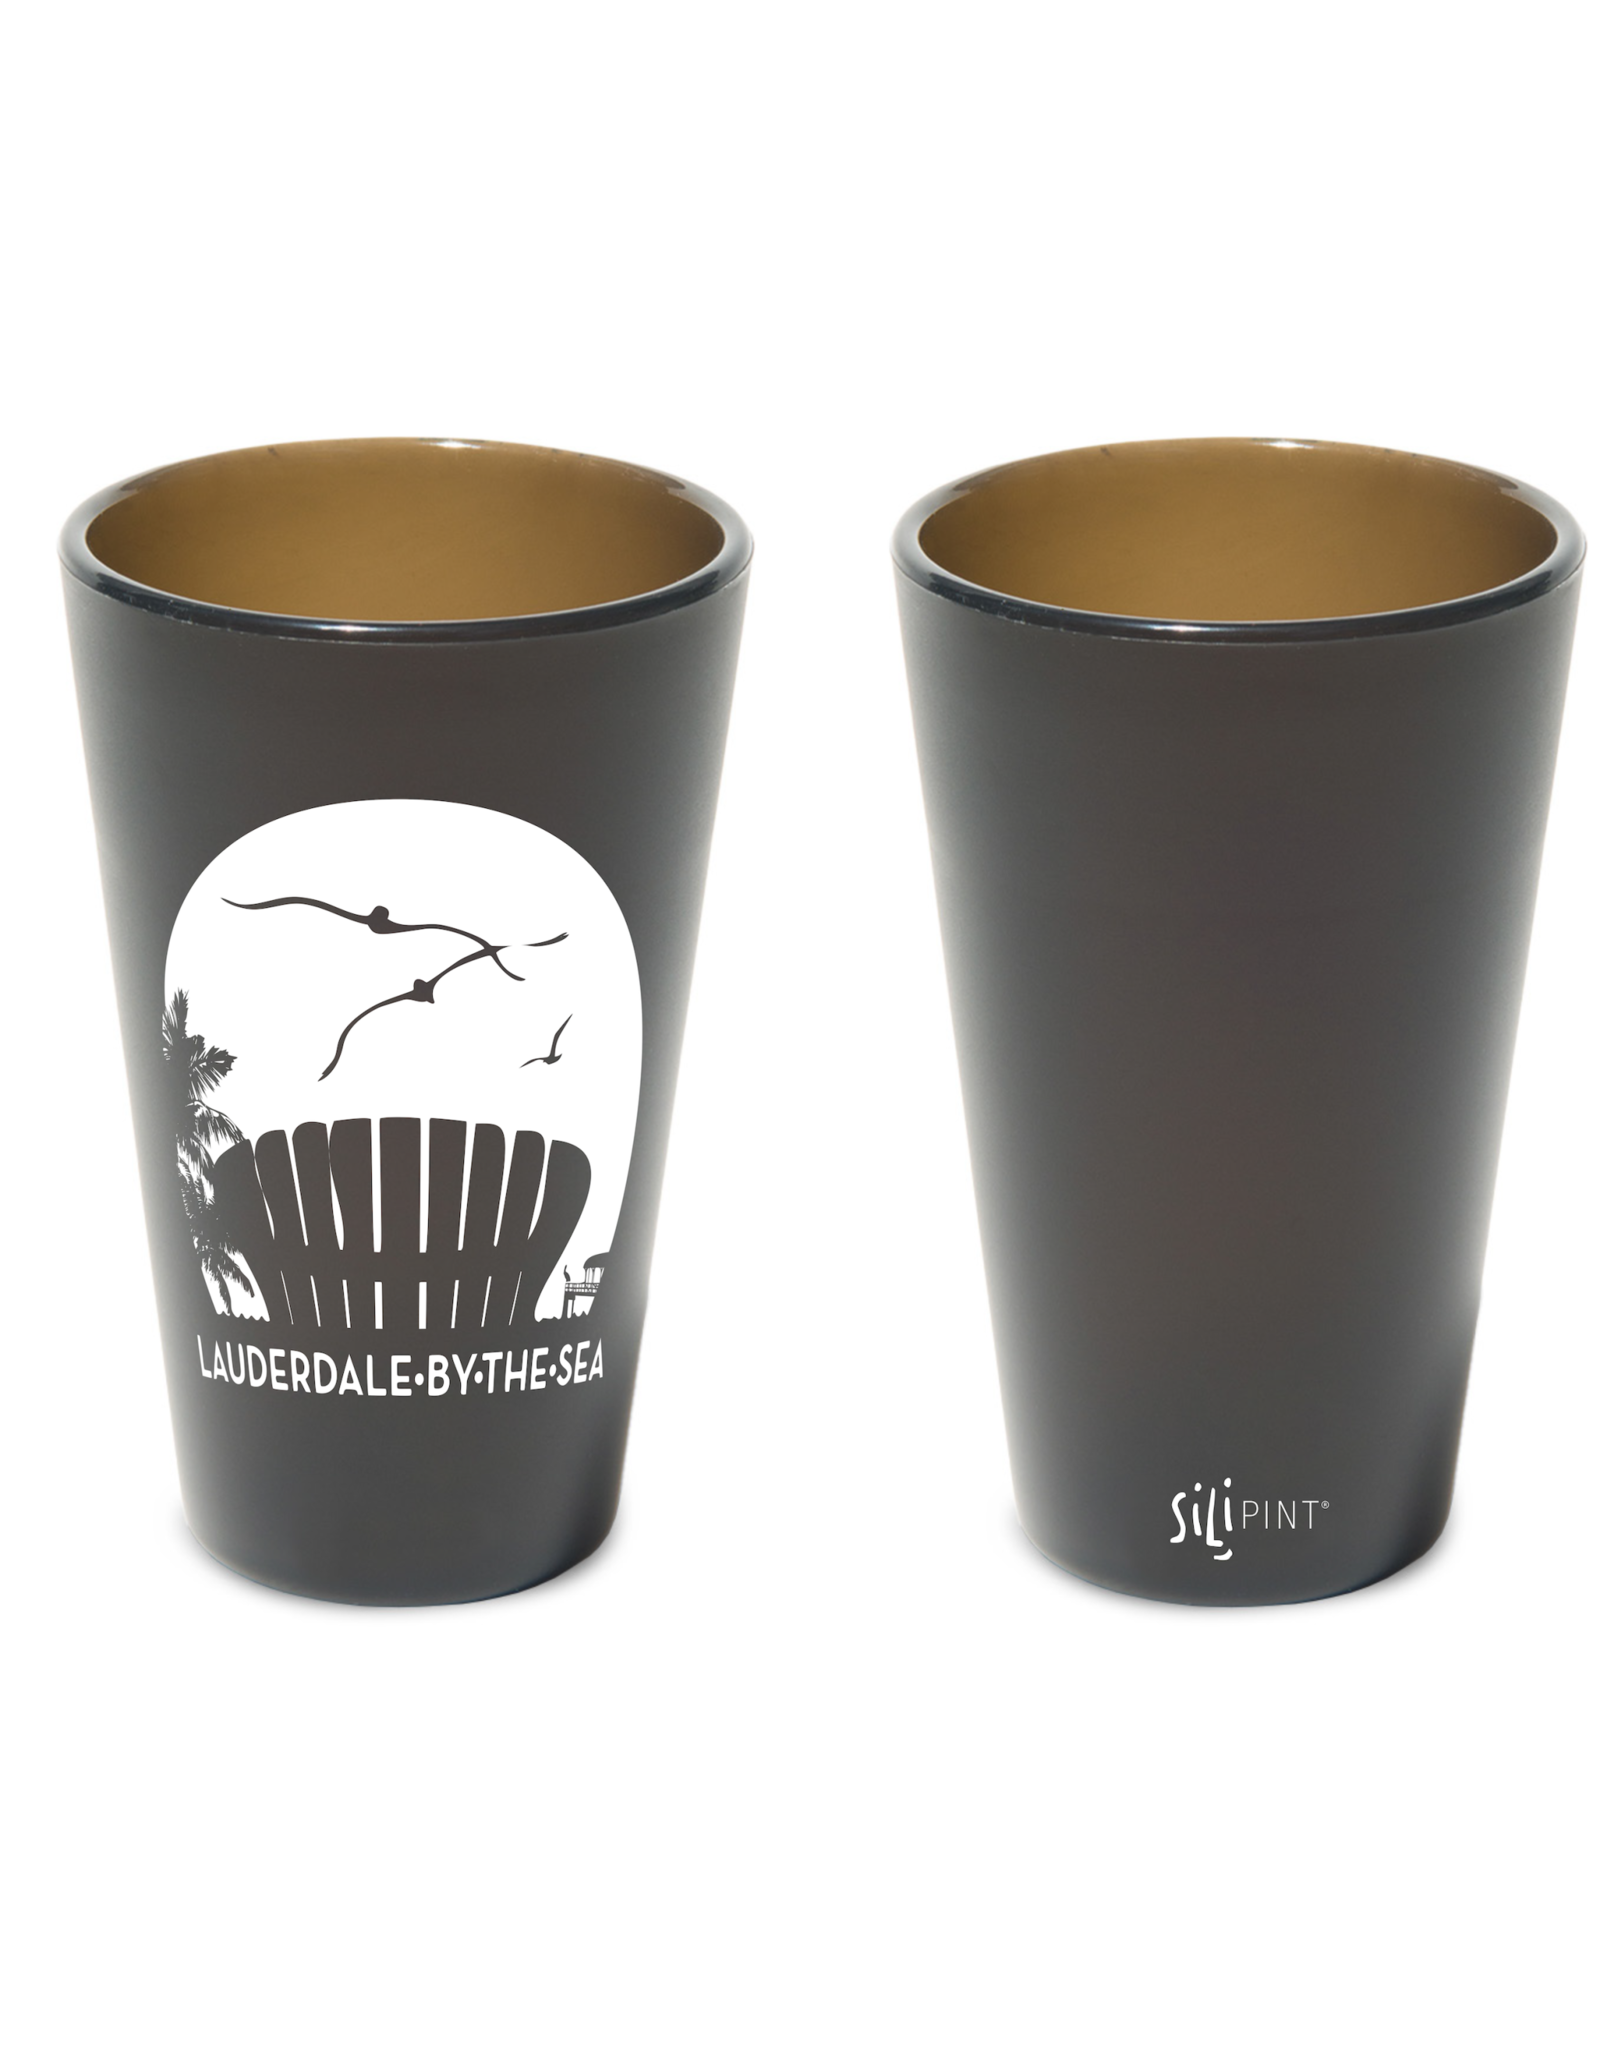 SiliPINT Silicone Pint Glass Lauderdale-By-The-Sea 16oz Smoke